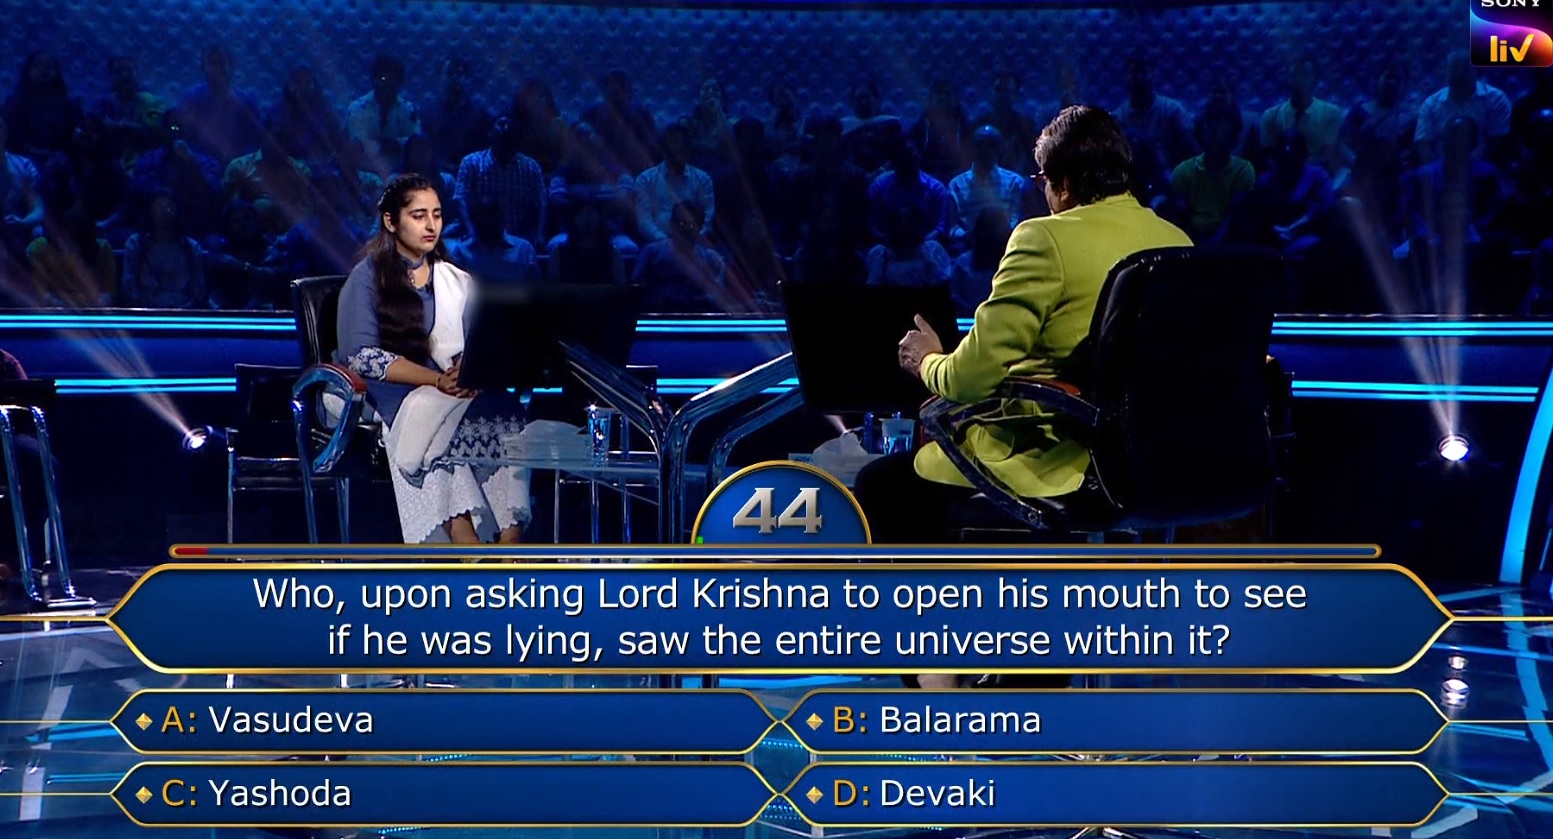 Ques : Who, upon asking Lord Krishna to open his mouth to see if he was lying, saw the entire universe within it?